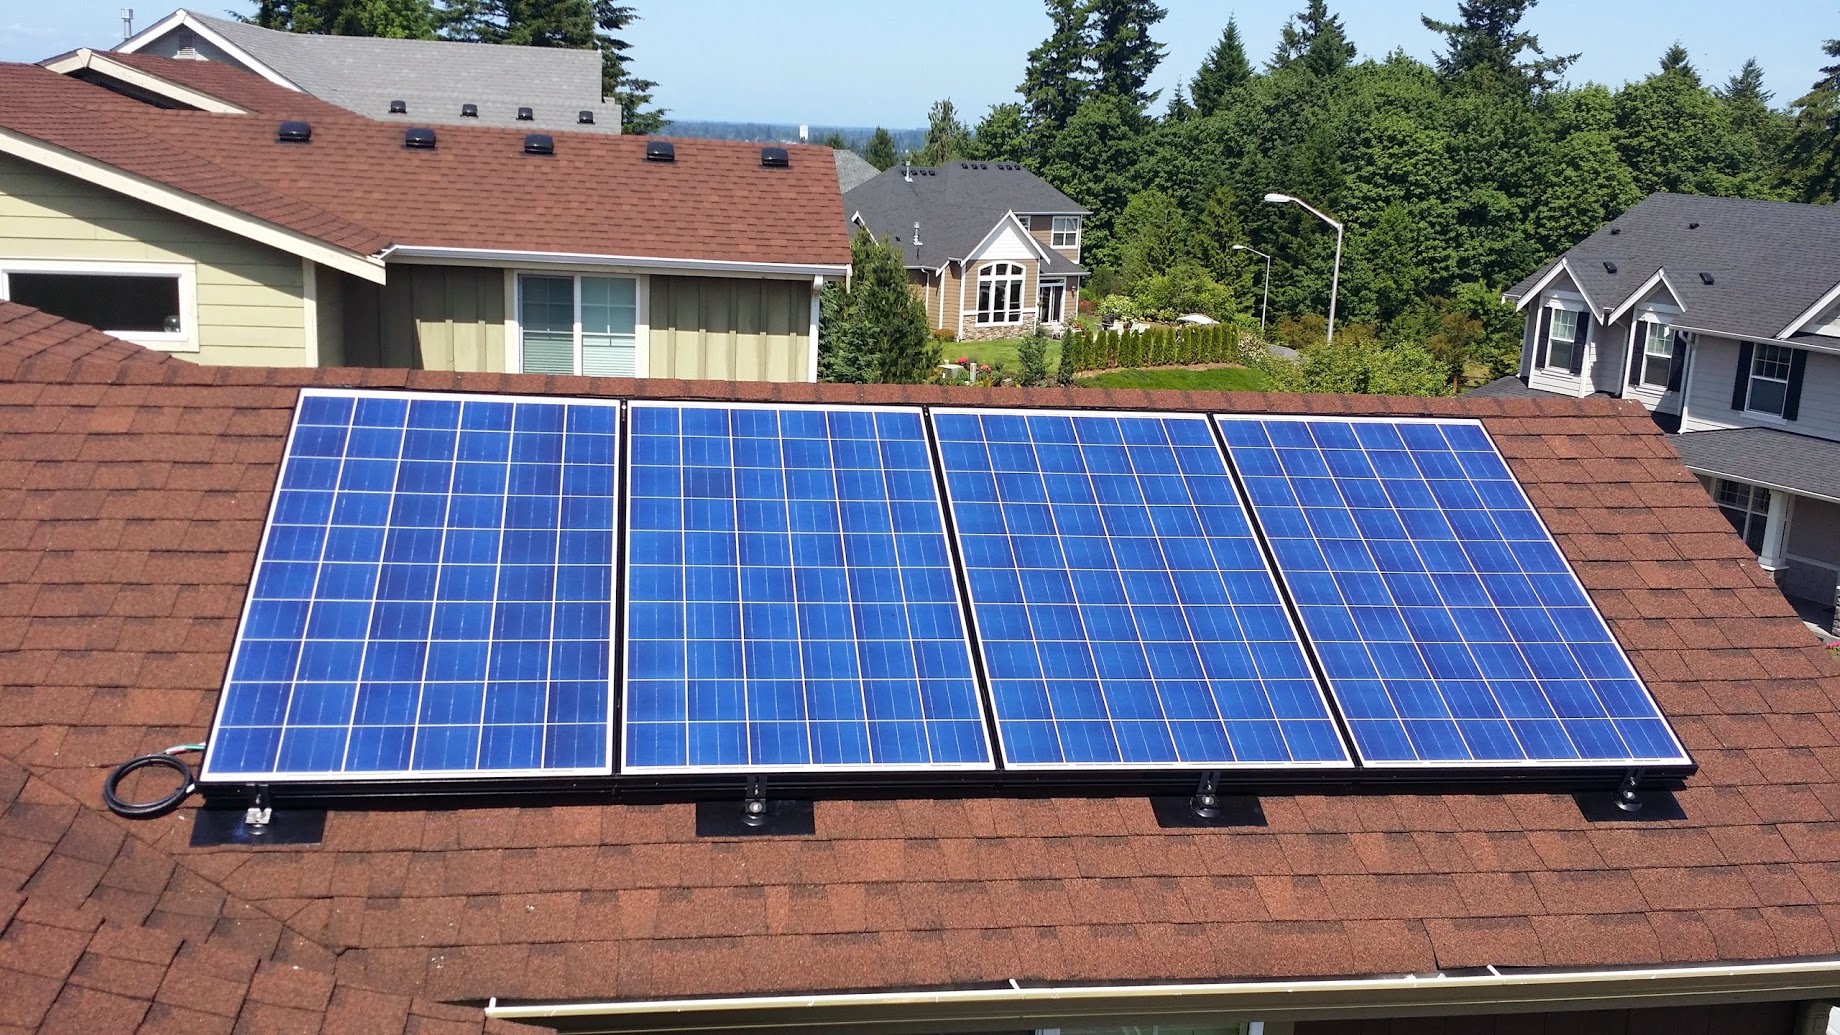 Photovoltaic Solar System uses 80% fewer parts than traditional solar systems on the market